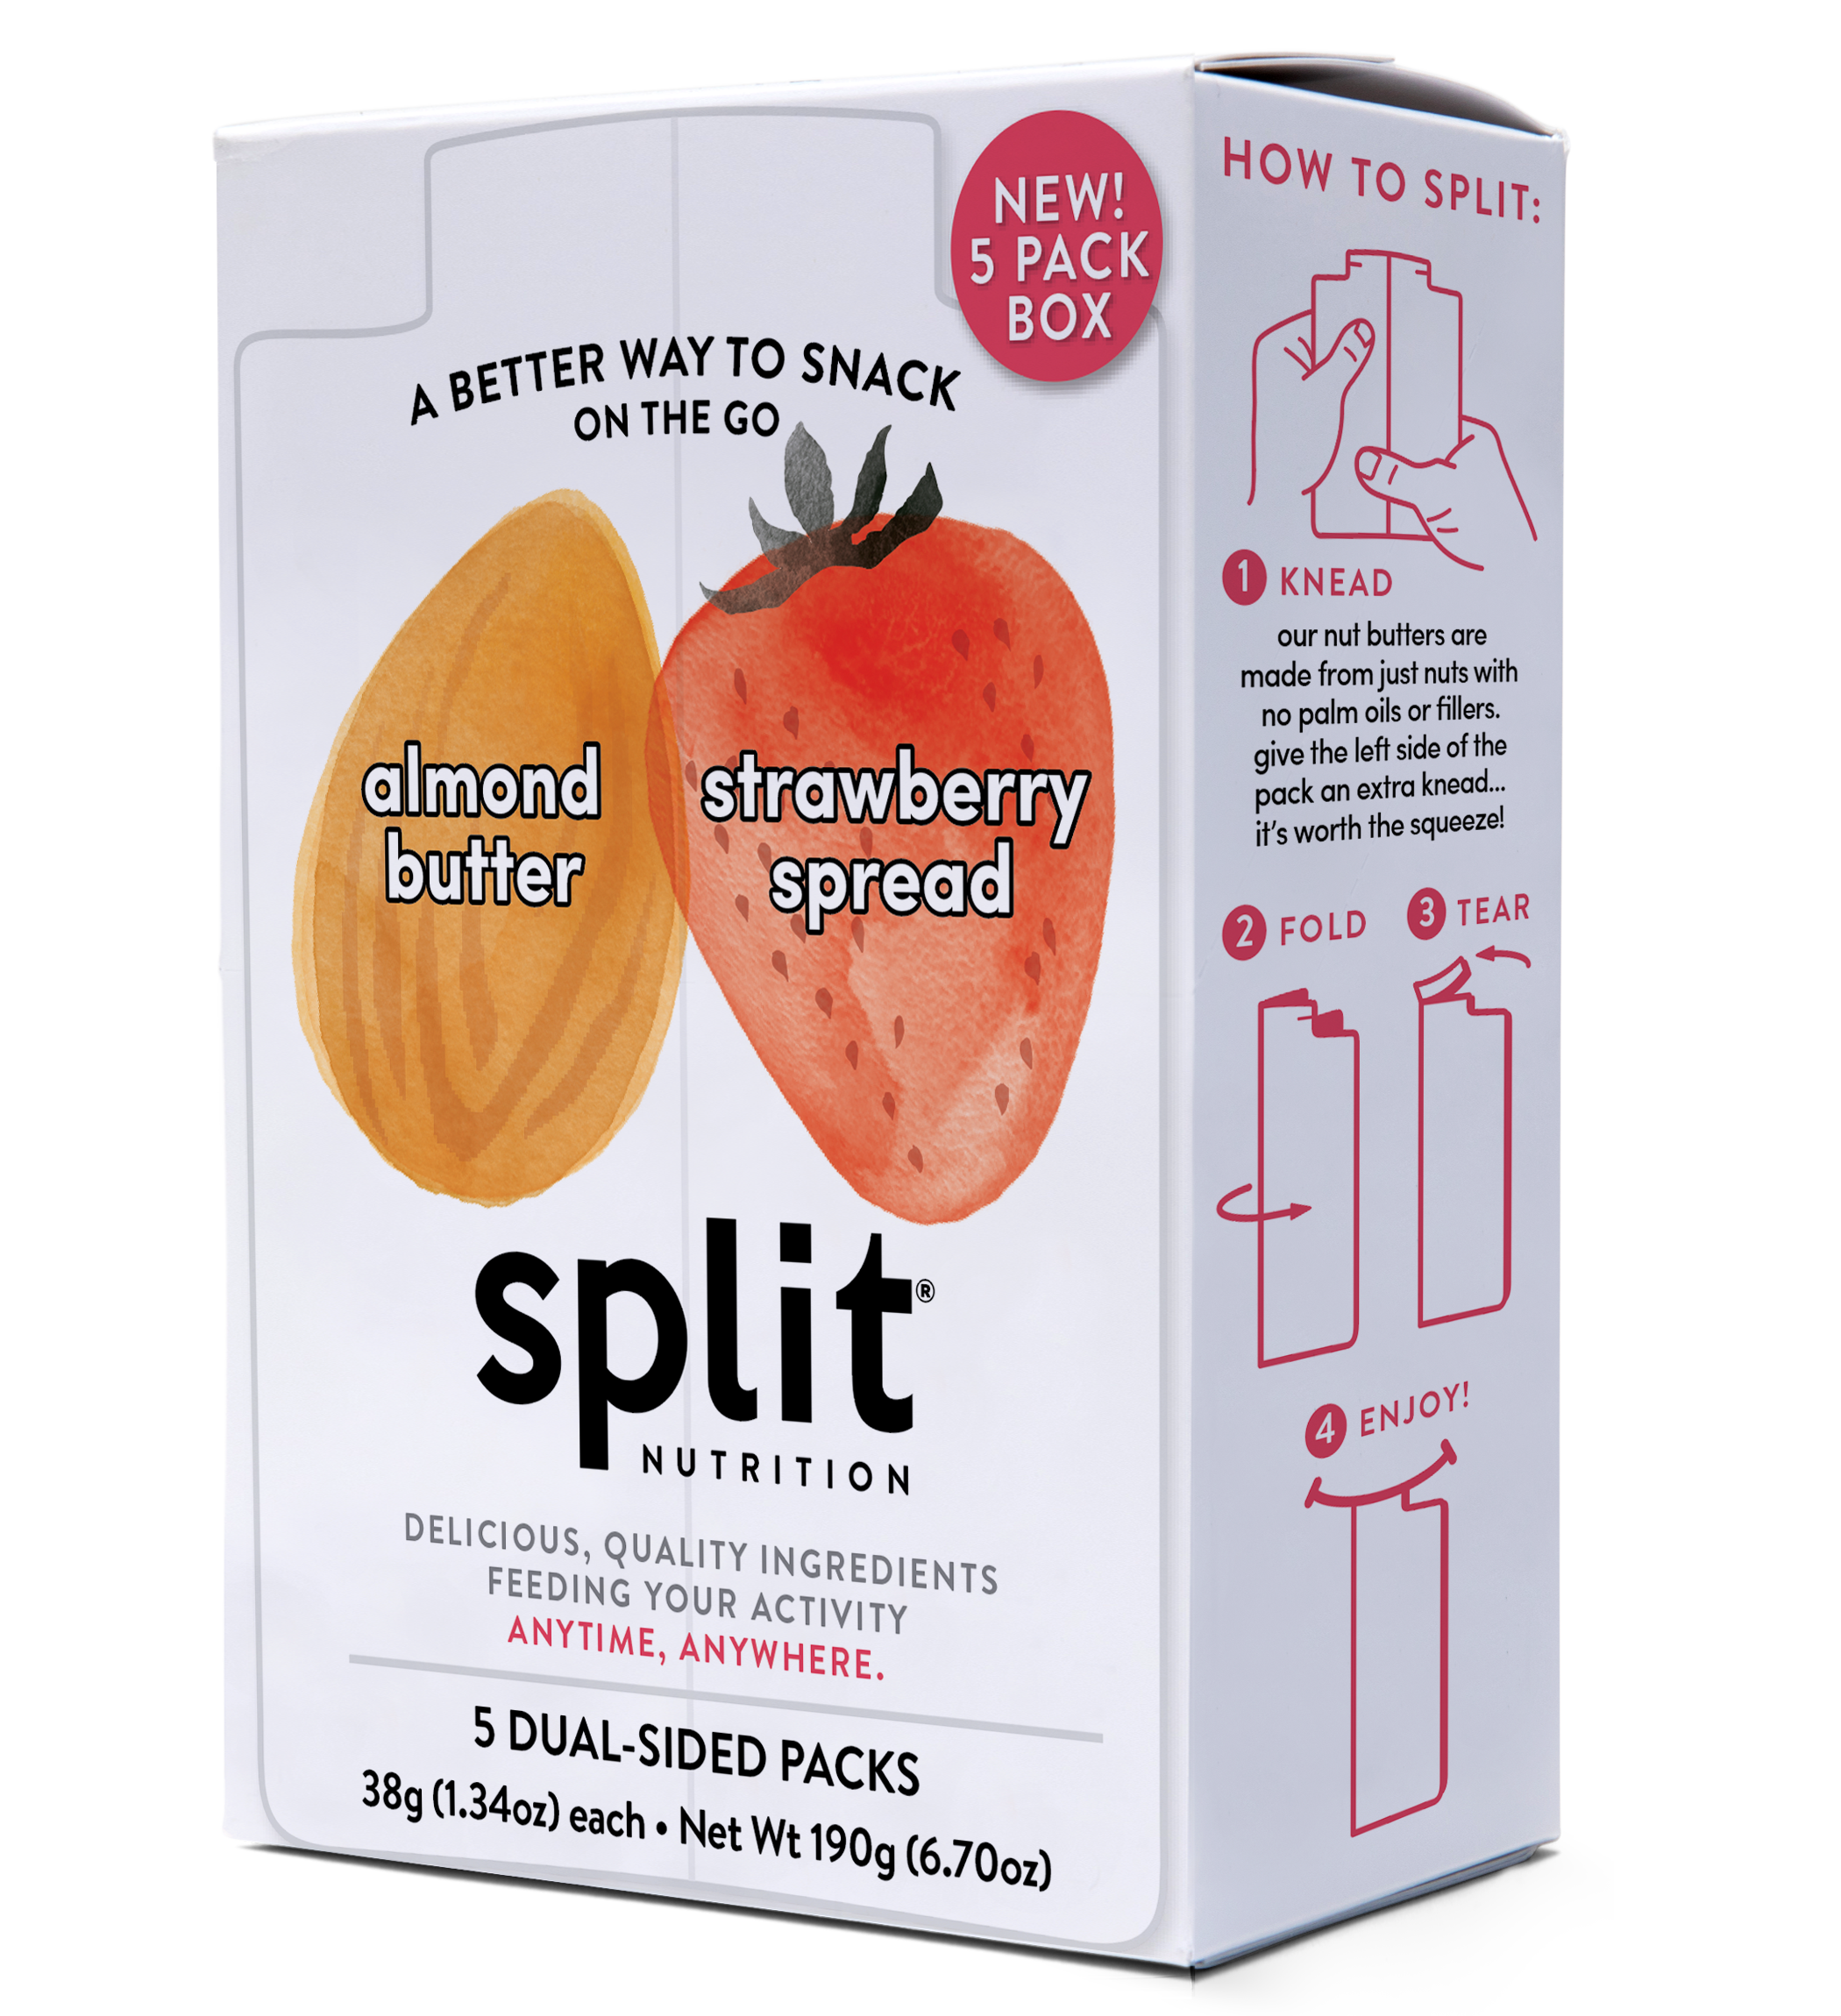 Split Nutrition Almond Butter and Strawberry Fruit Spread (5ct box) 8 innerpacks per case 6.7 oz